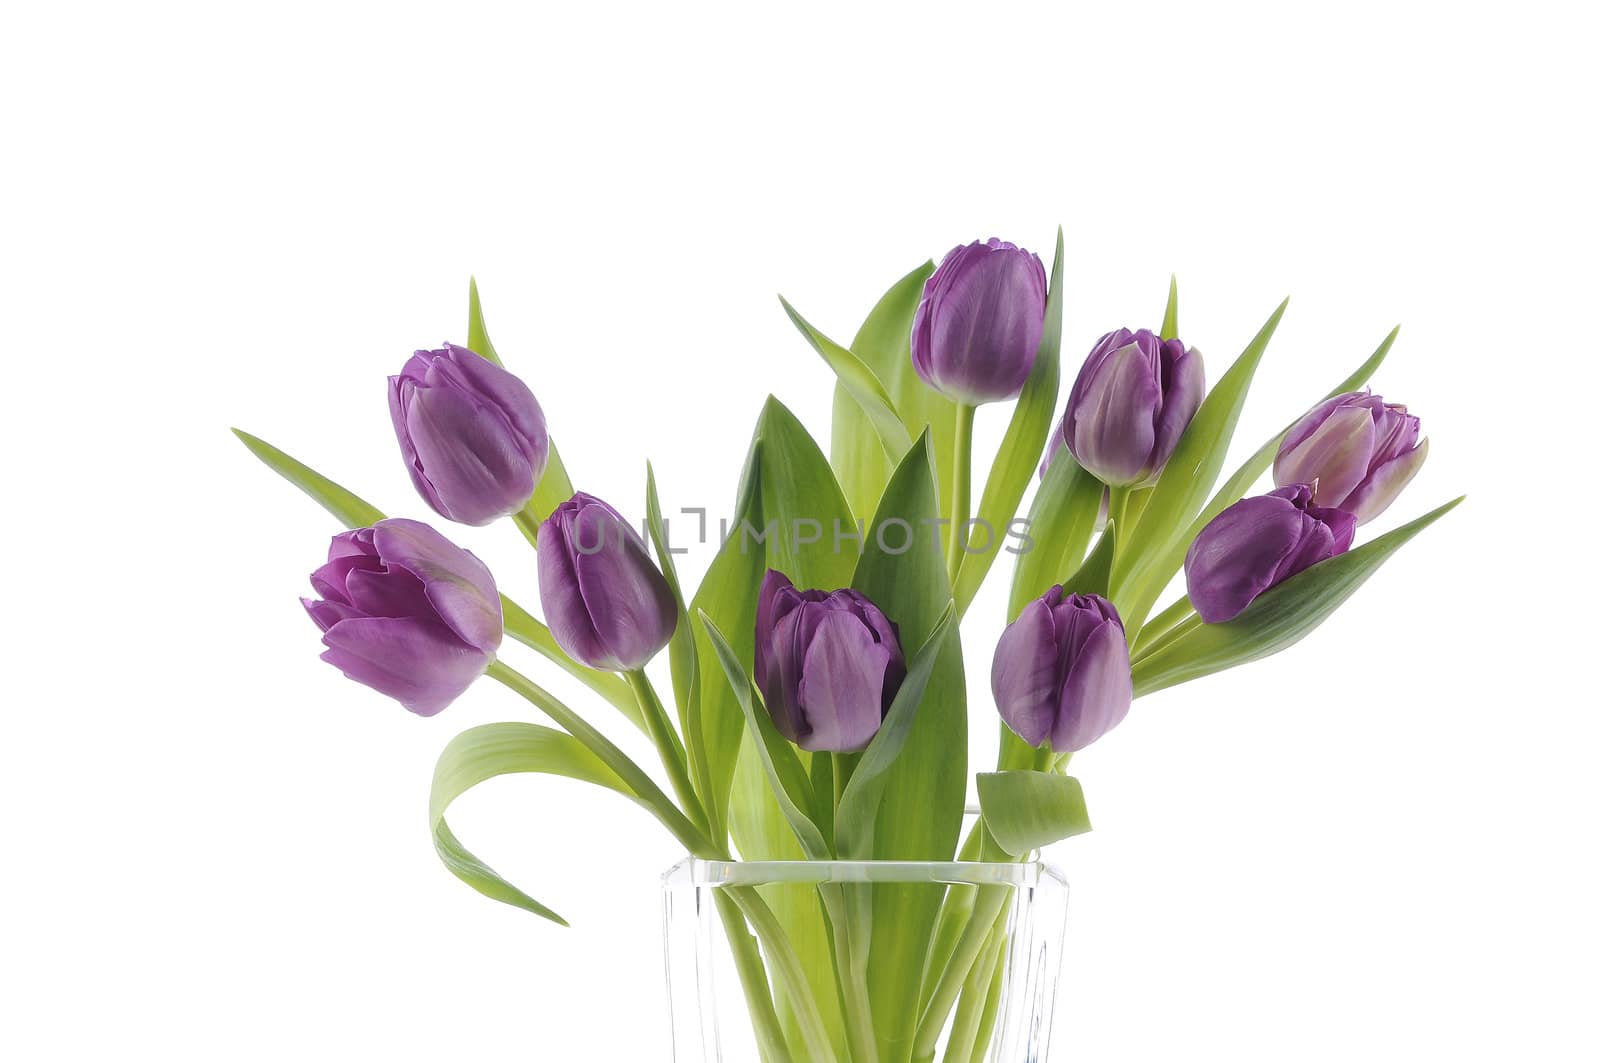 A bouquet of purple tulips in a vase against a white background